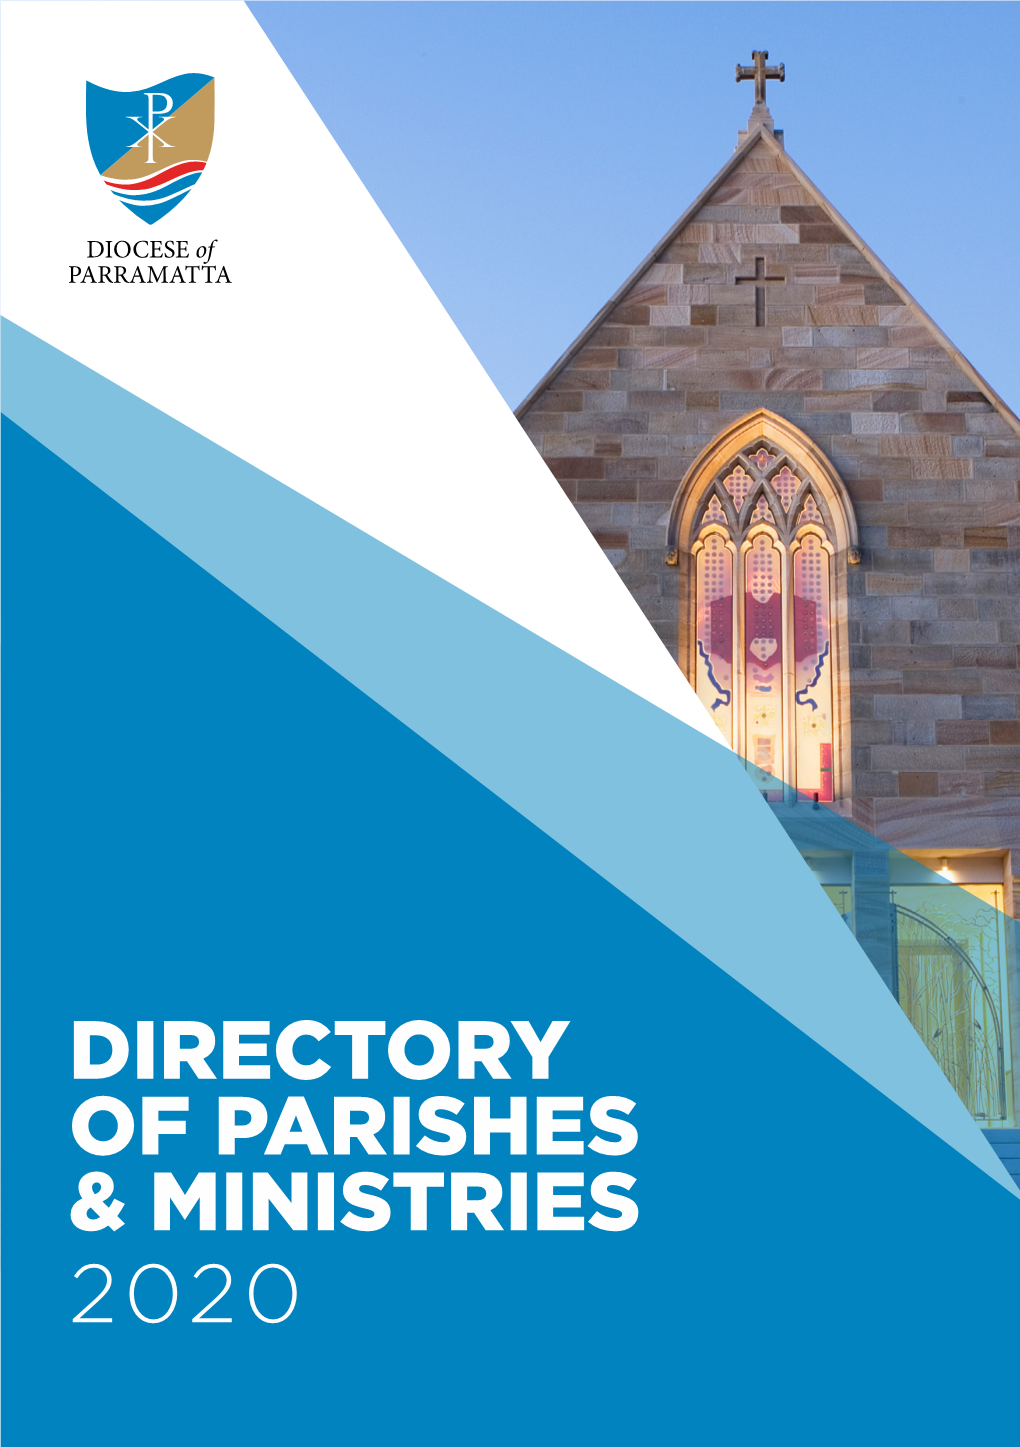 Directory of Parishes & Ministries 2020